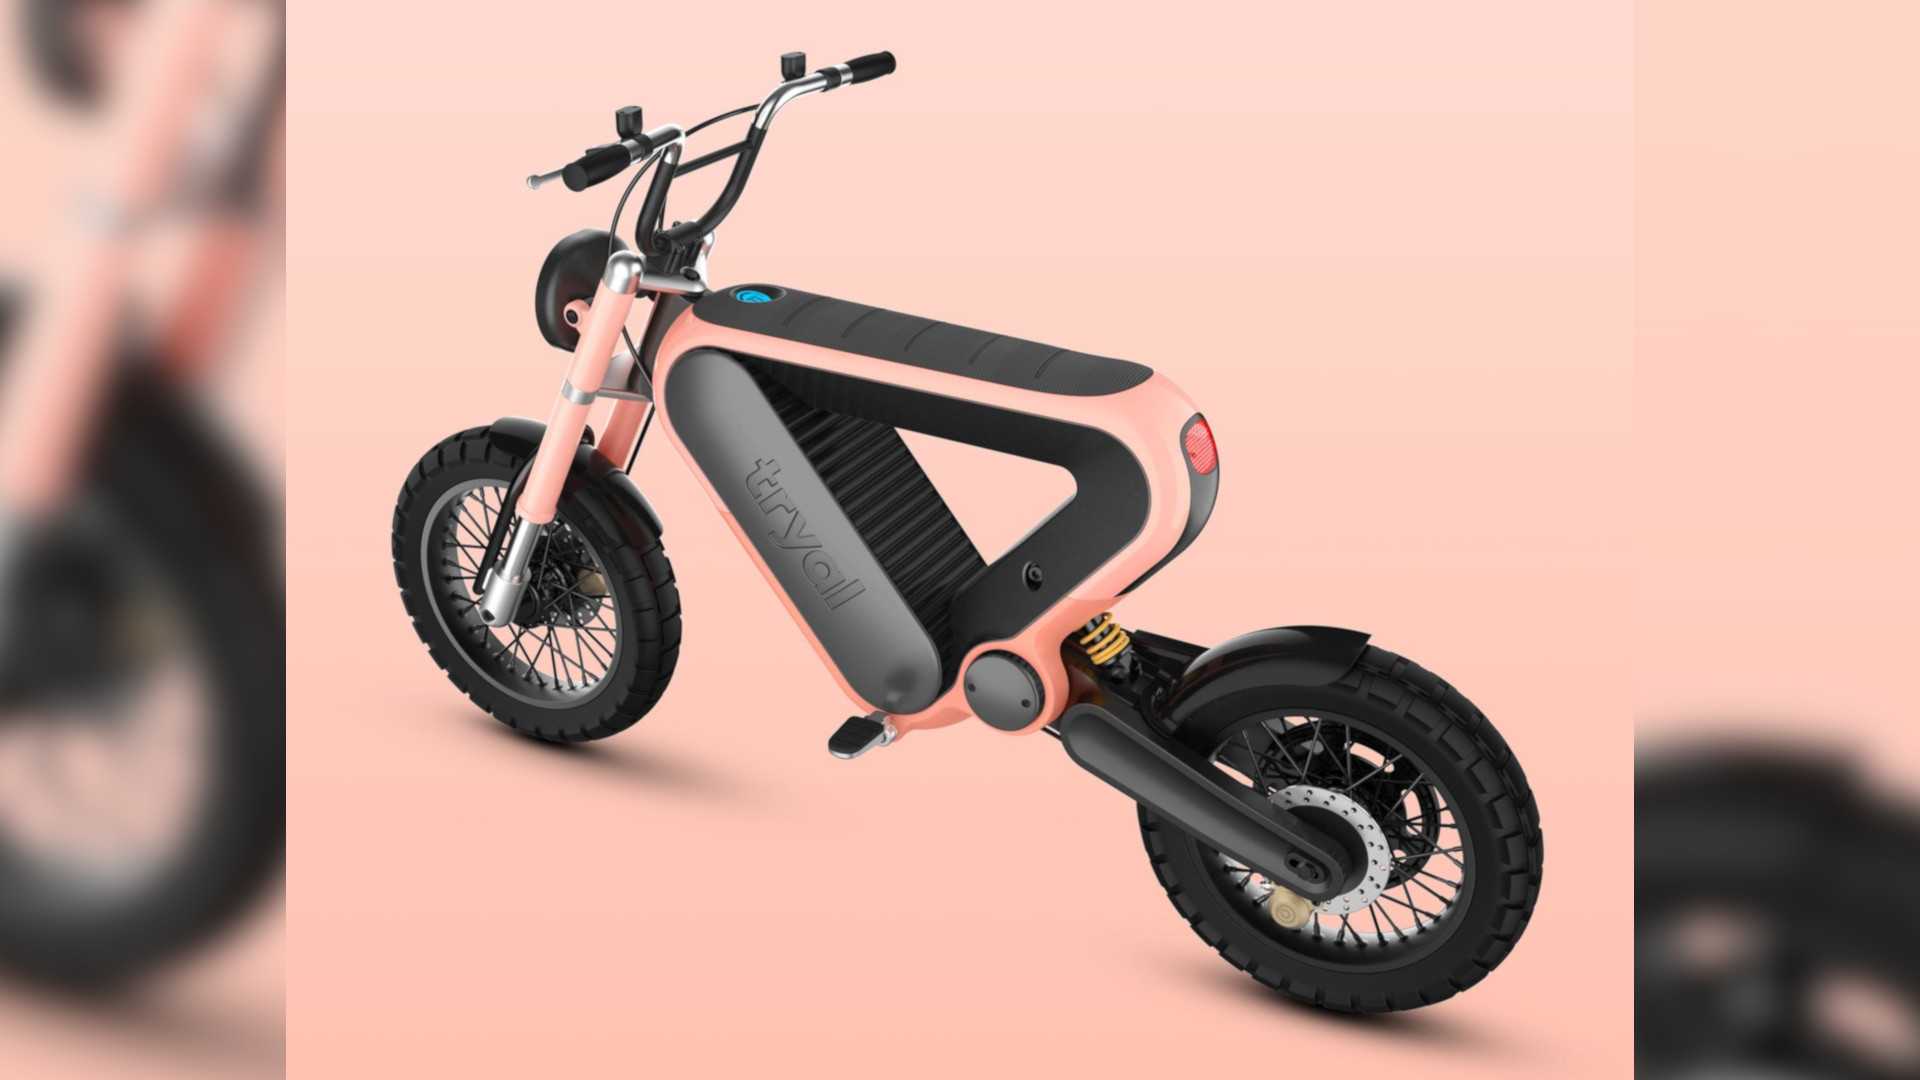 This Rizoma Design Challenge Winner Looks Painful, Unrideable